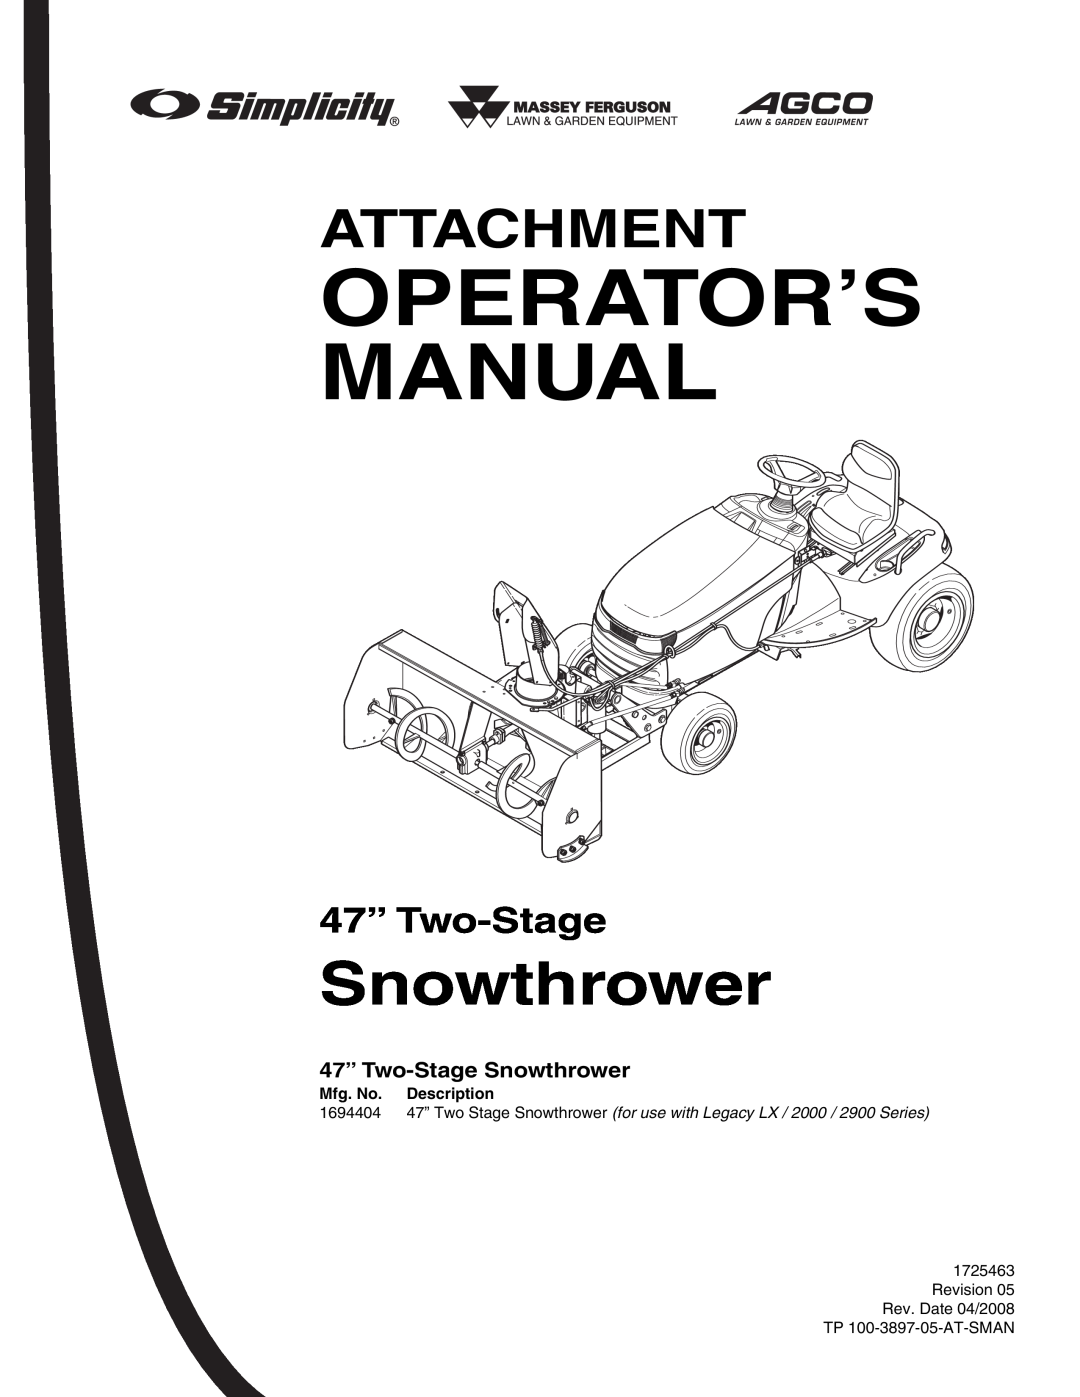 Massey Ferguson L&G 1694404 manual 47” Two-Stage Snowthrower, Operator’S Manual, Attachment 